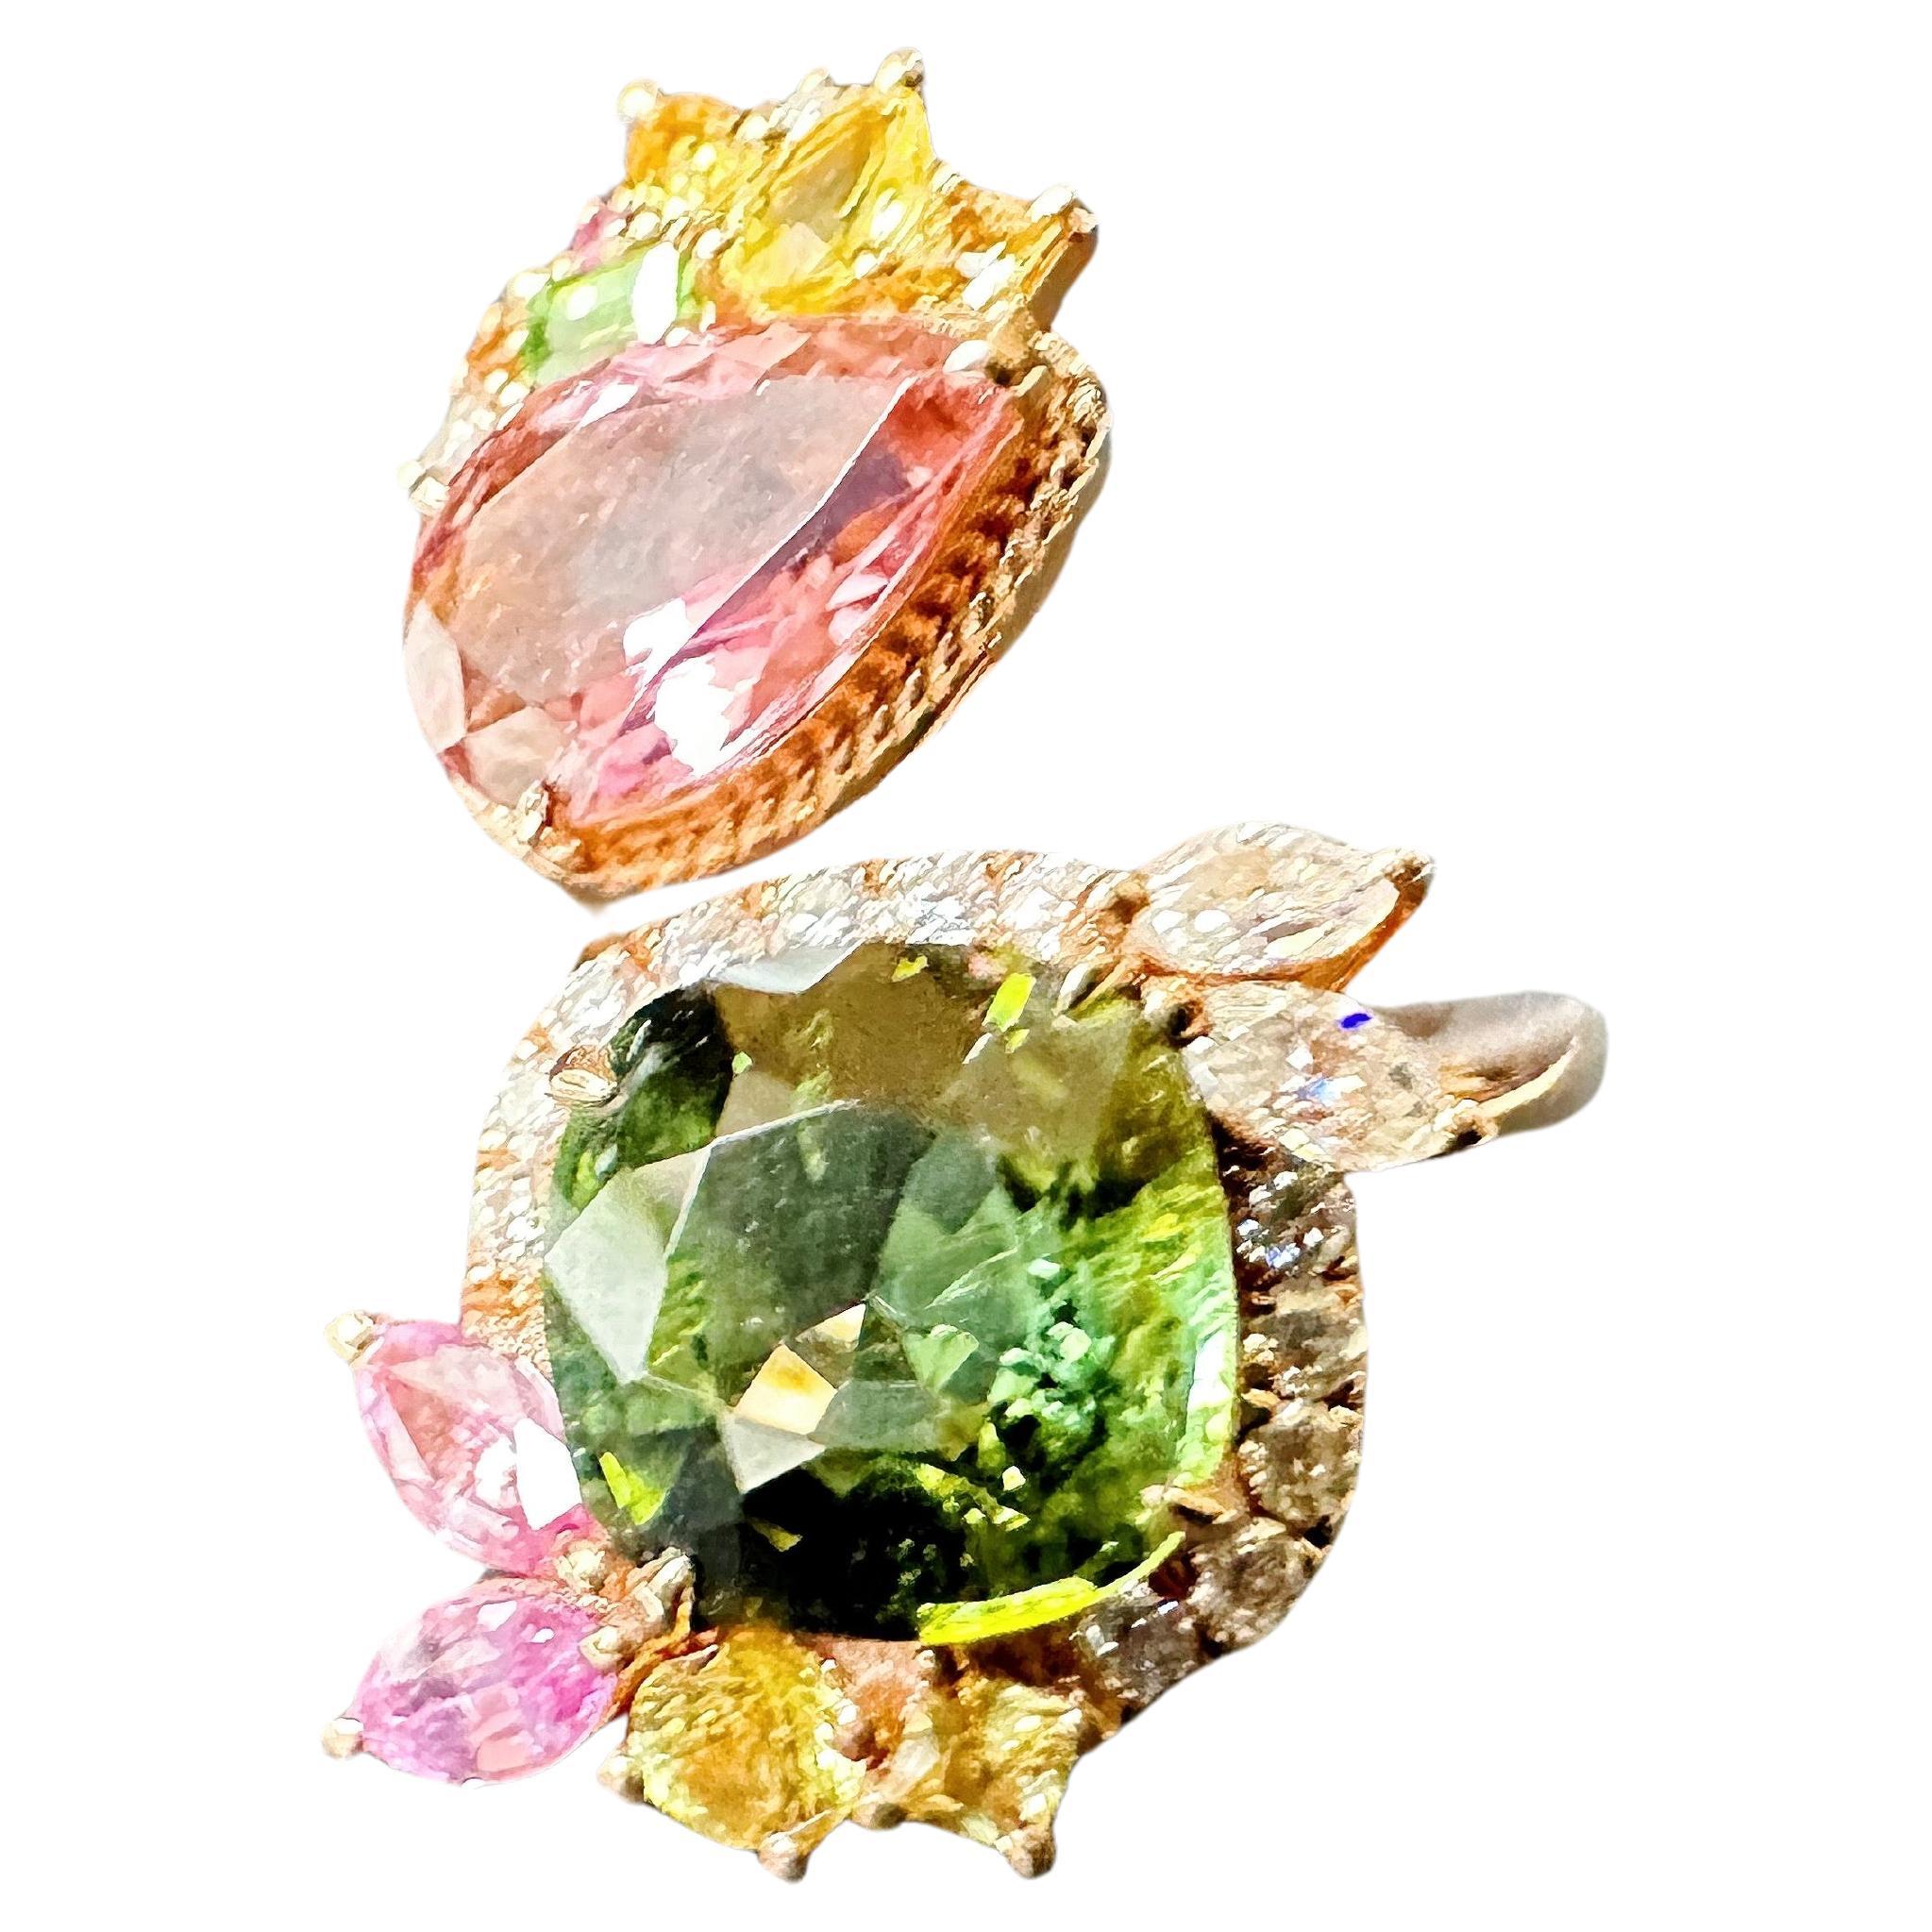 We handpick these stunning, beautiful green and pink tourmalines. Accompanied by brilliant yellow, green, and pink colored moissanite, this custom-designed twin gemstones statement ring is simply unique and one-of-a-kind. The fancy color burst of